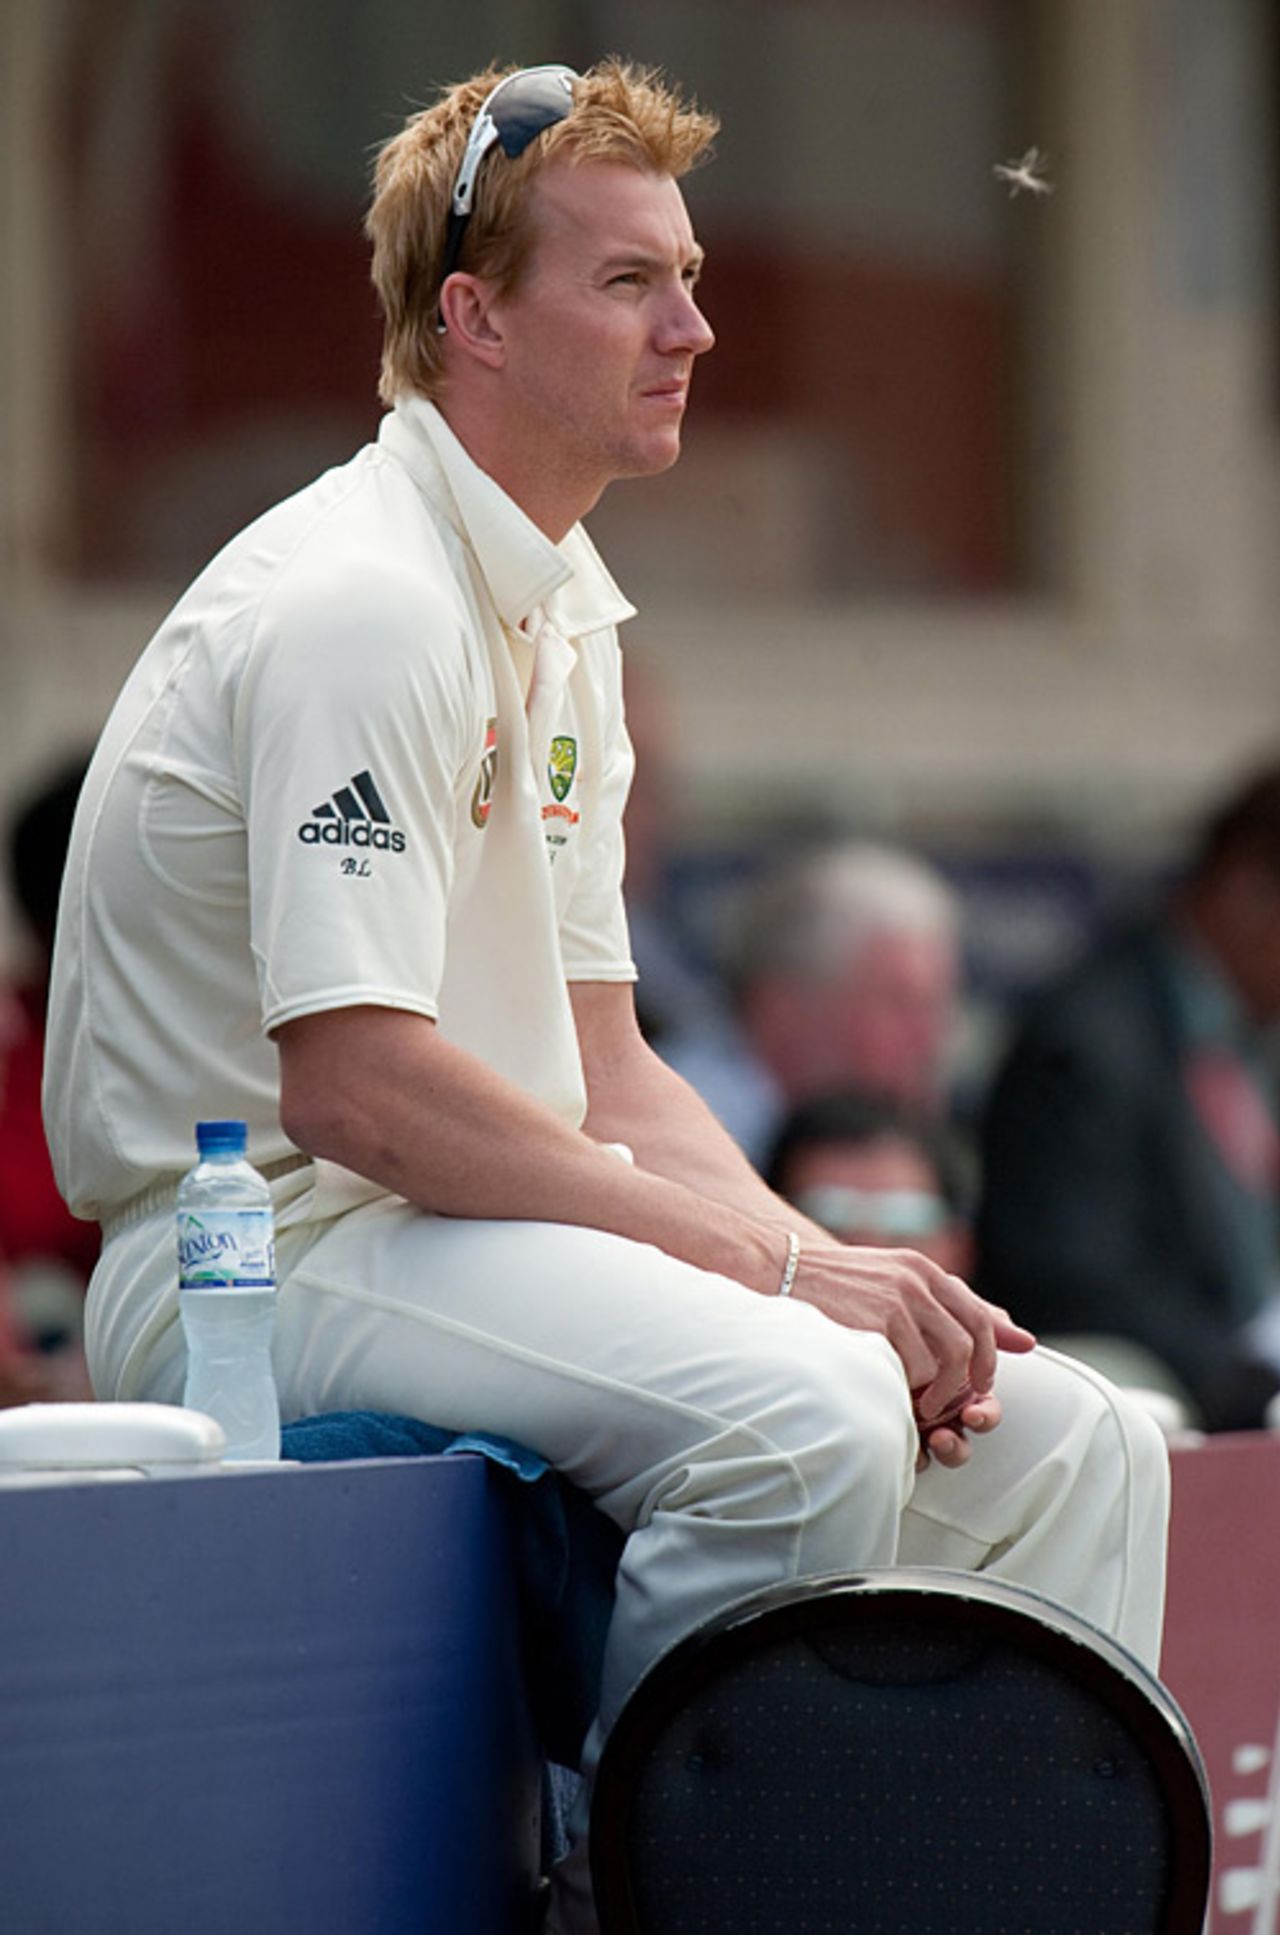 Sorely missed: an injured Brett Lee watches on from the sideline, England v Australia, 3rd Test, Edgbaston, 5th day, August 3, 2009